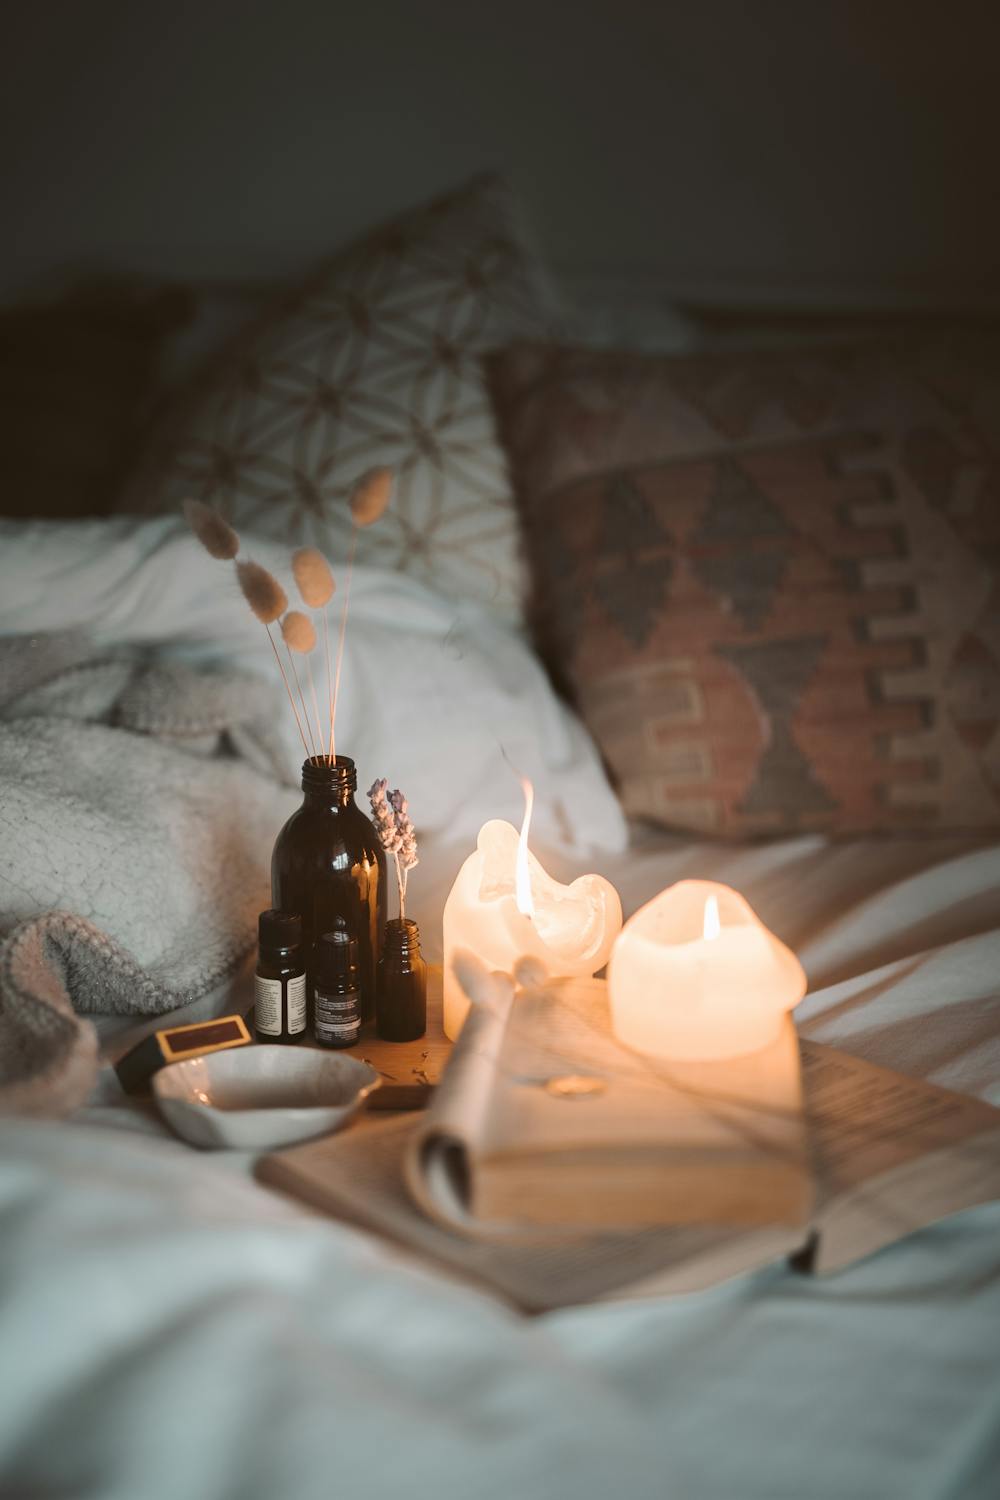 Image of books, candles, and incense on white sheets over a bed. Shows how taking time to read most important spiritual books helps us relax and reconnect with ourselves.